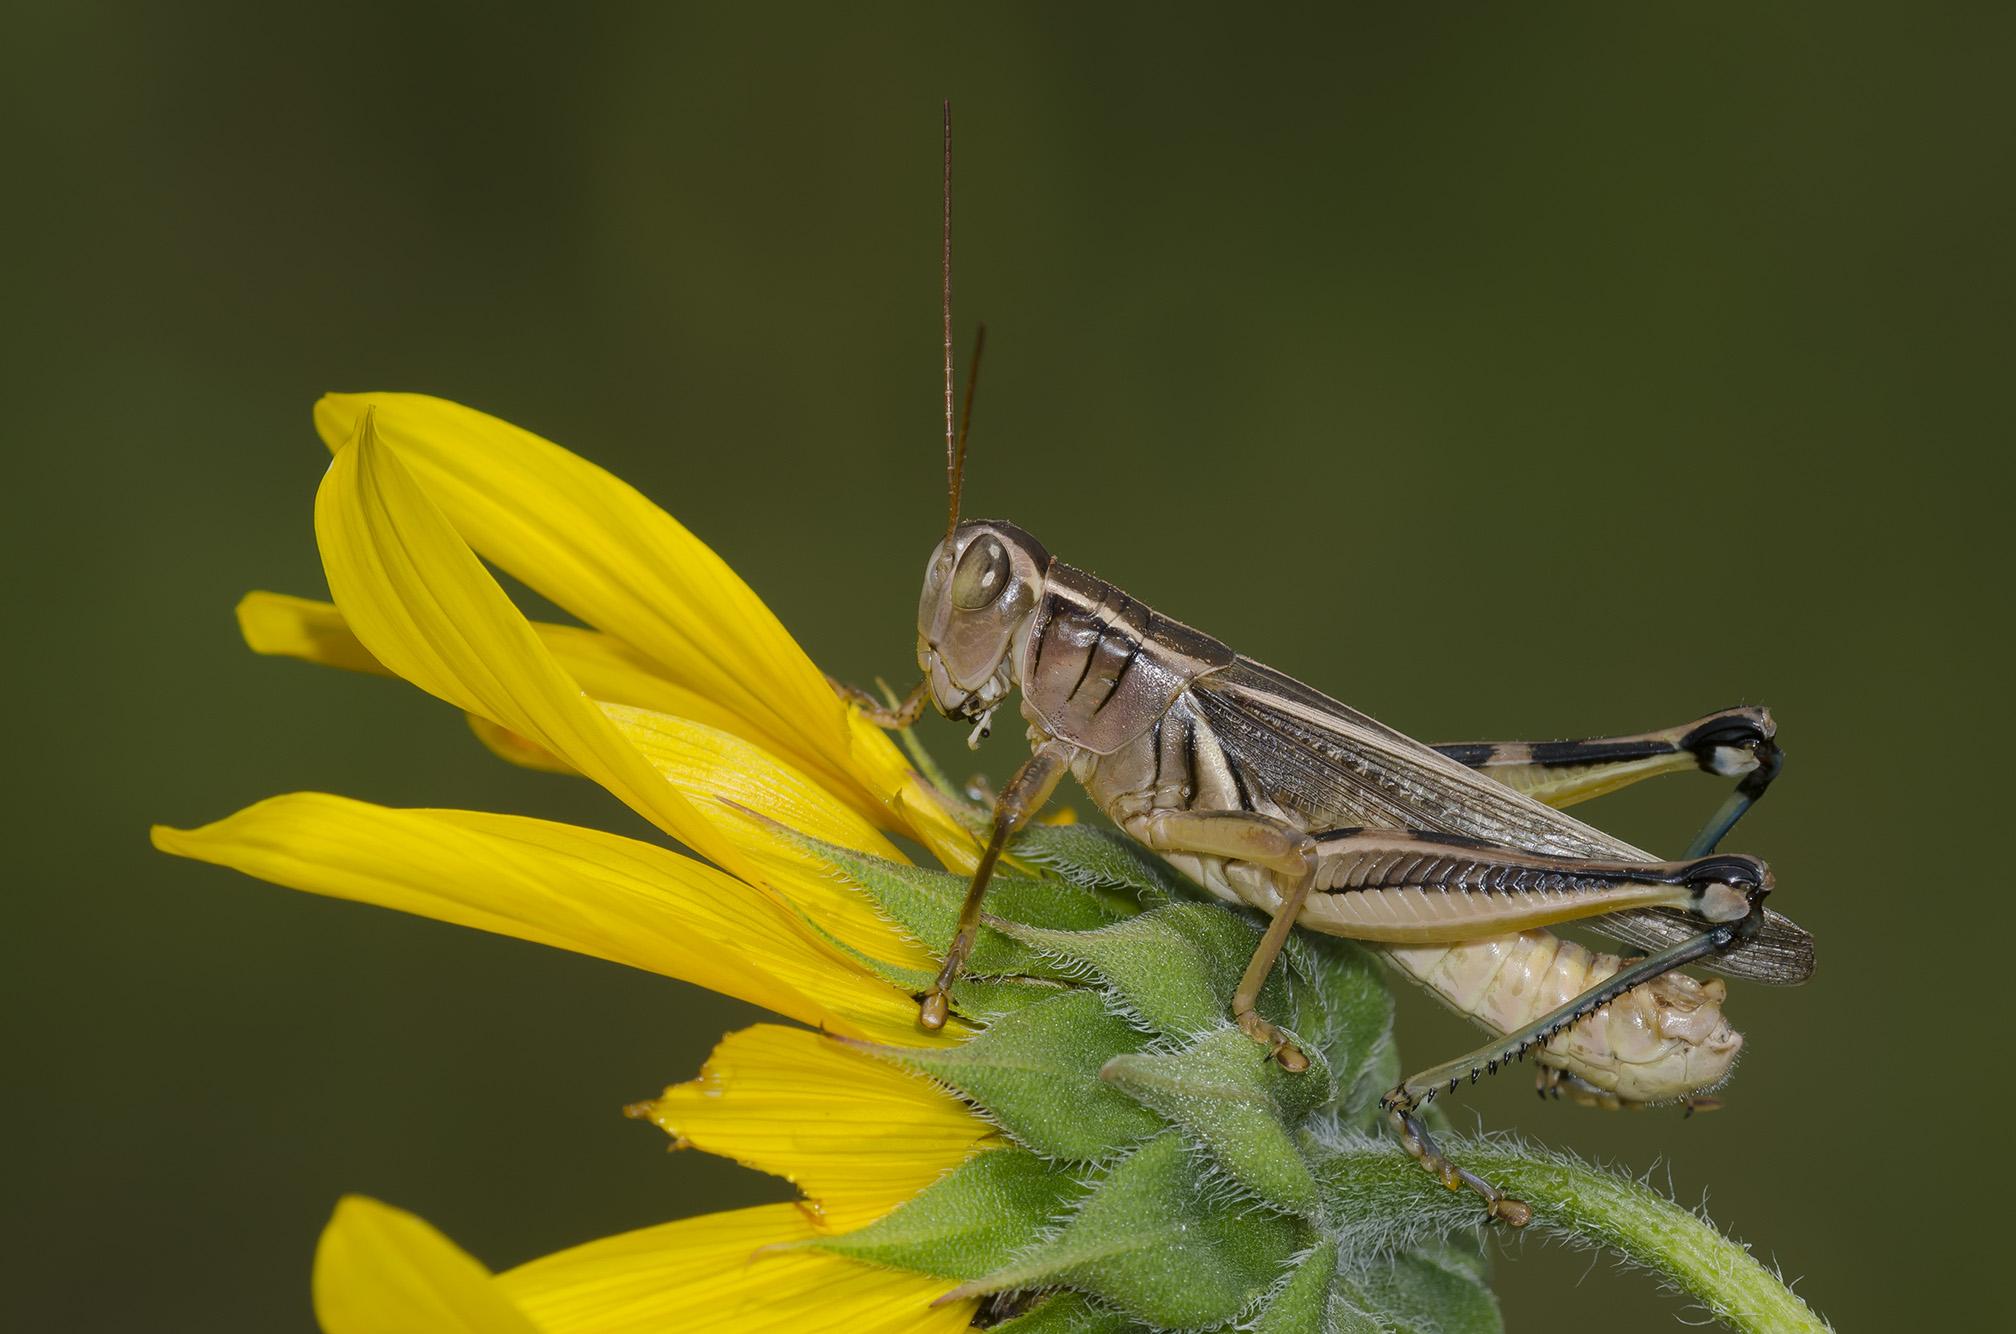 A close up of a grasshopper sitting on a yellow flower. The grasshopper is facing to the left, with its wings closed over its back. It is brown and has black markings. The last sections of its hind legs are green-blue in color.